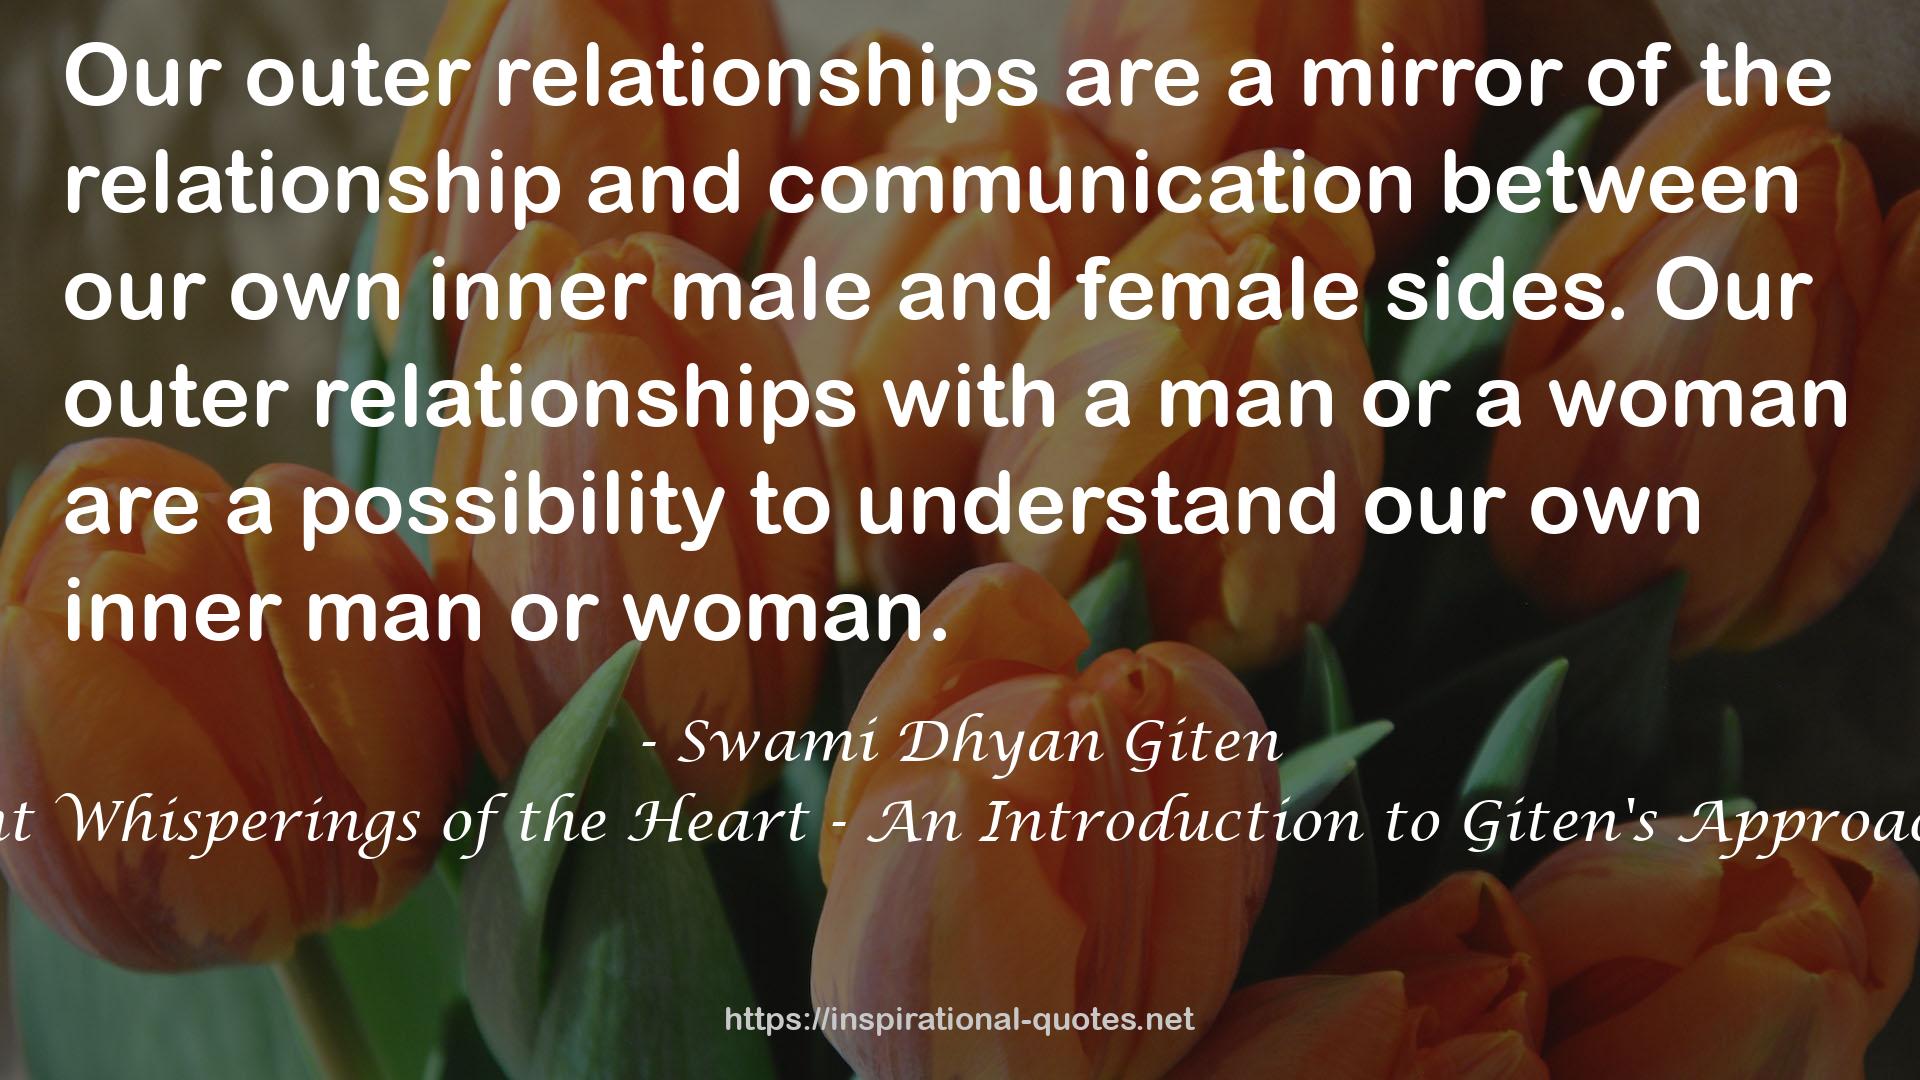 The Silent Whisperings of the Heart - An Introduction to Giten's Approach to Life QUOTES